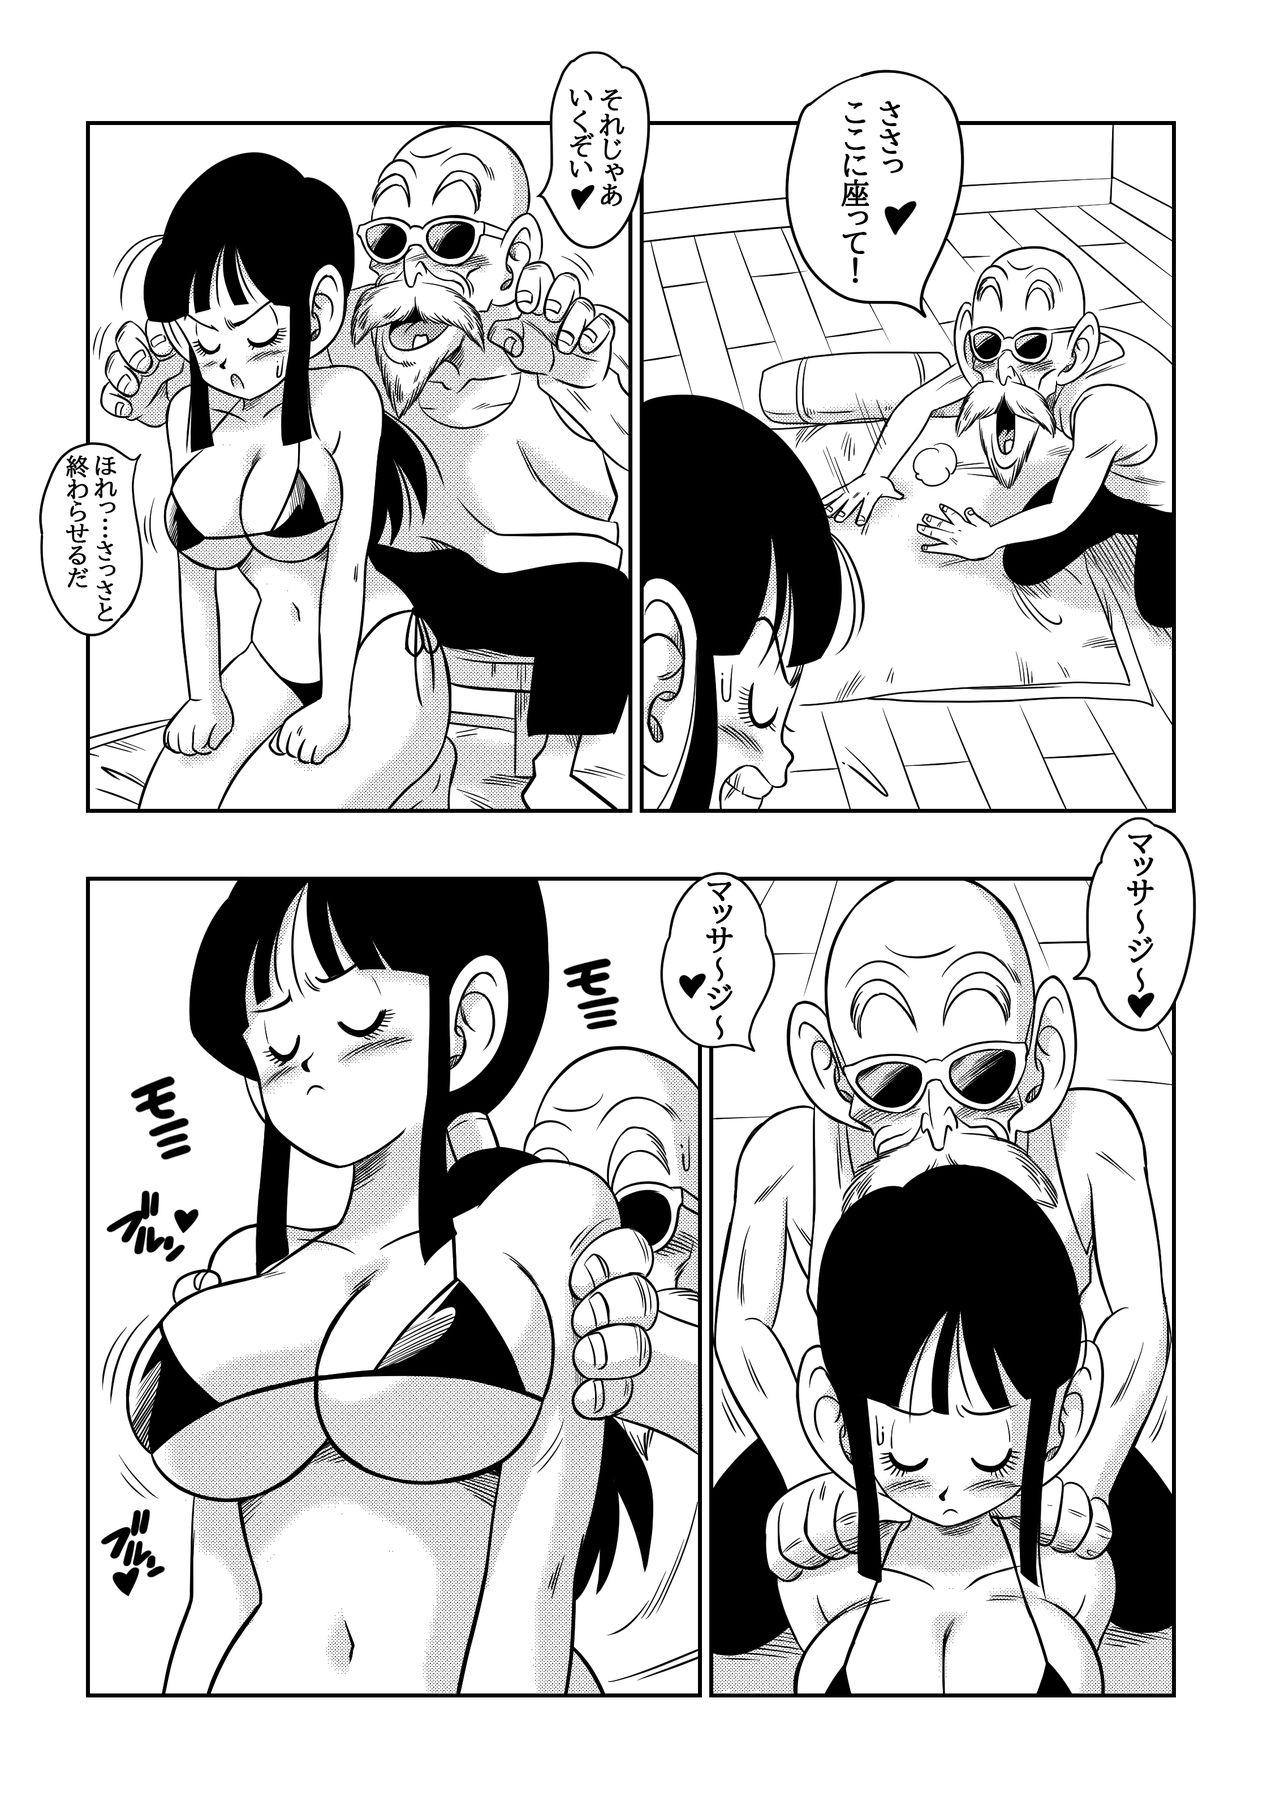 Hot Pussy "An Ancient Tradition" - Young Wife is Harassed! - Dragon ball z Cam - Page 8